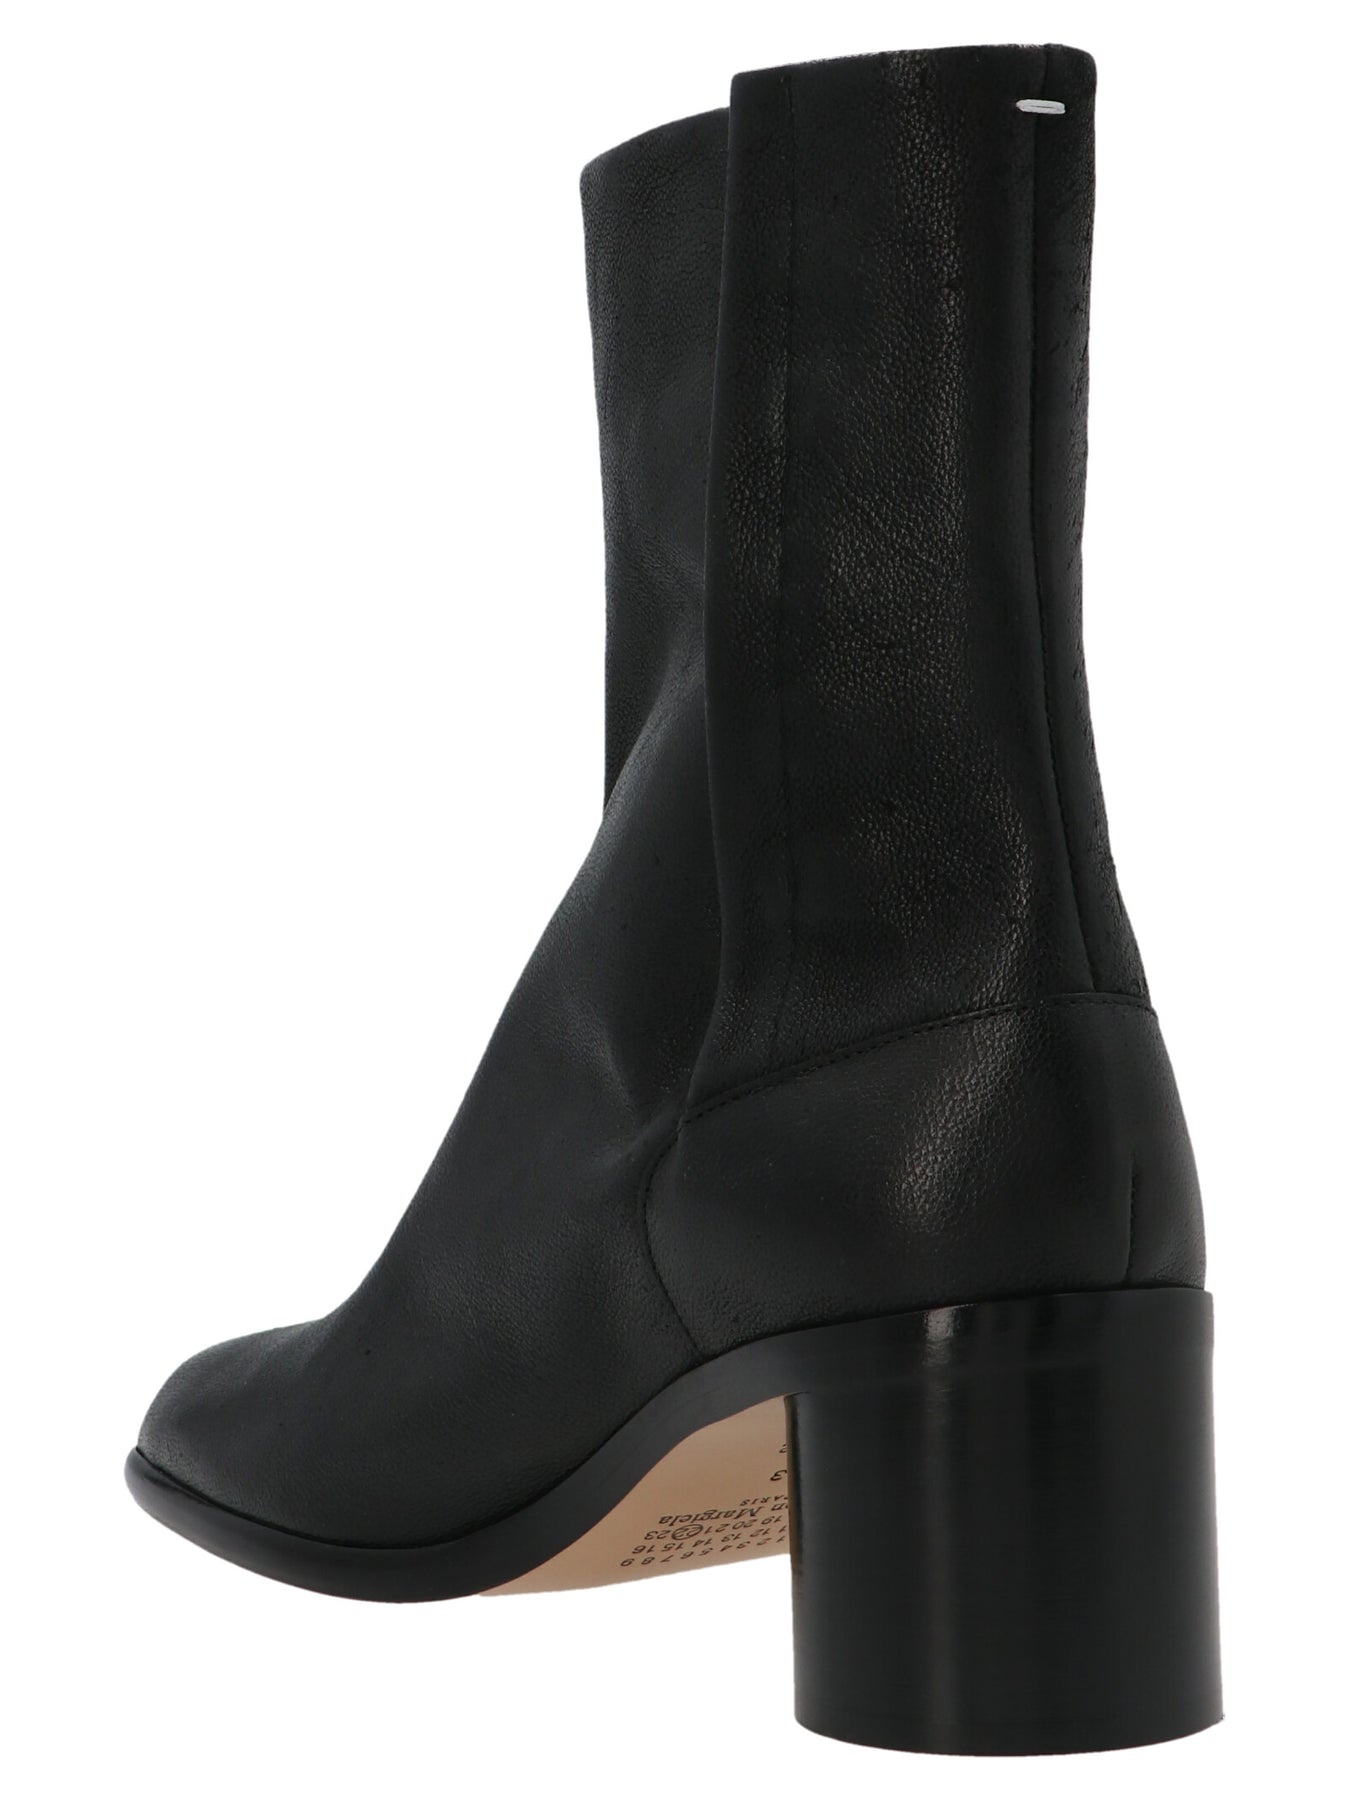 'Tabi' ankle boots - 2